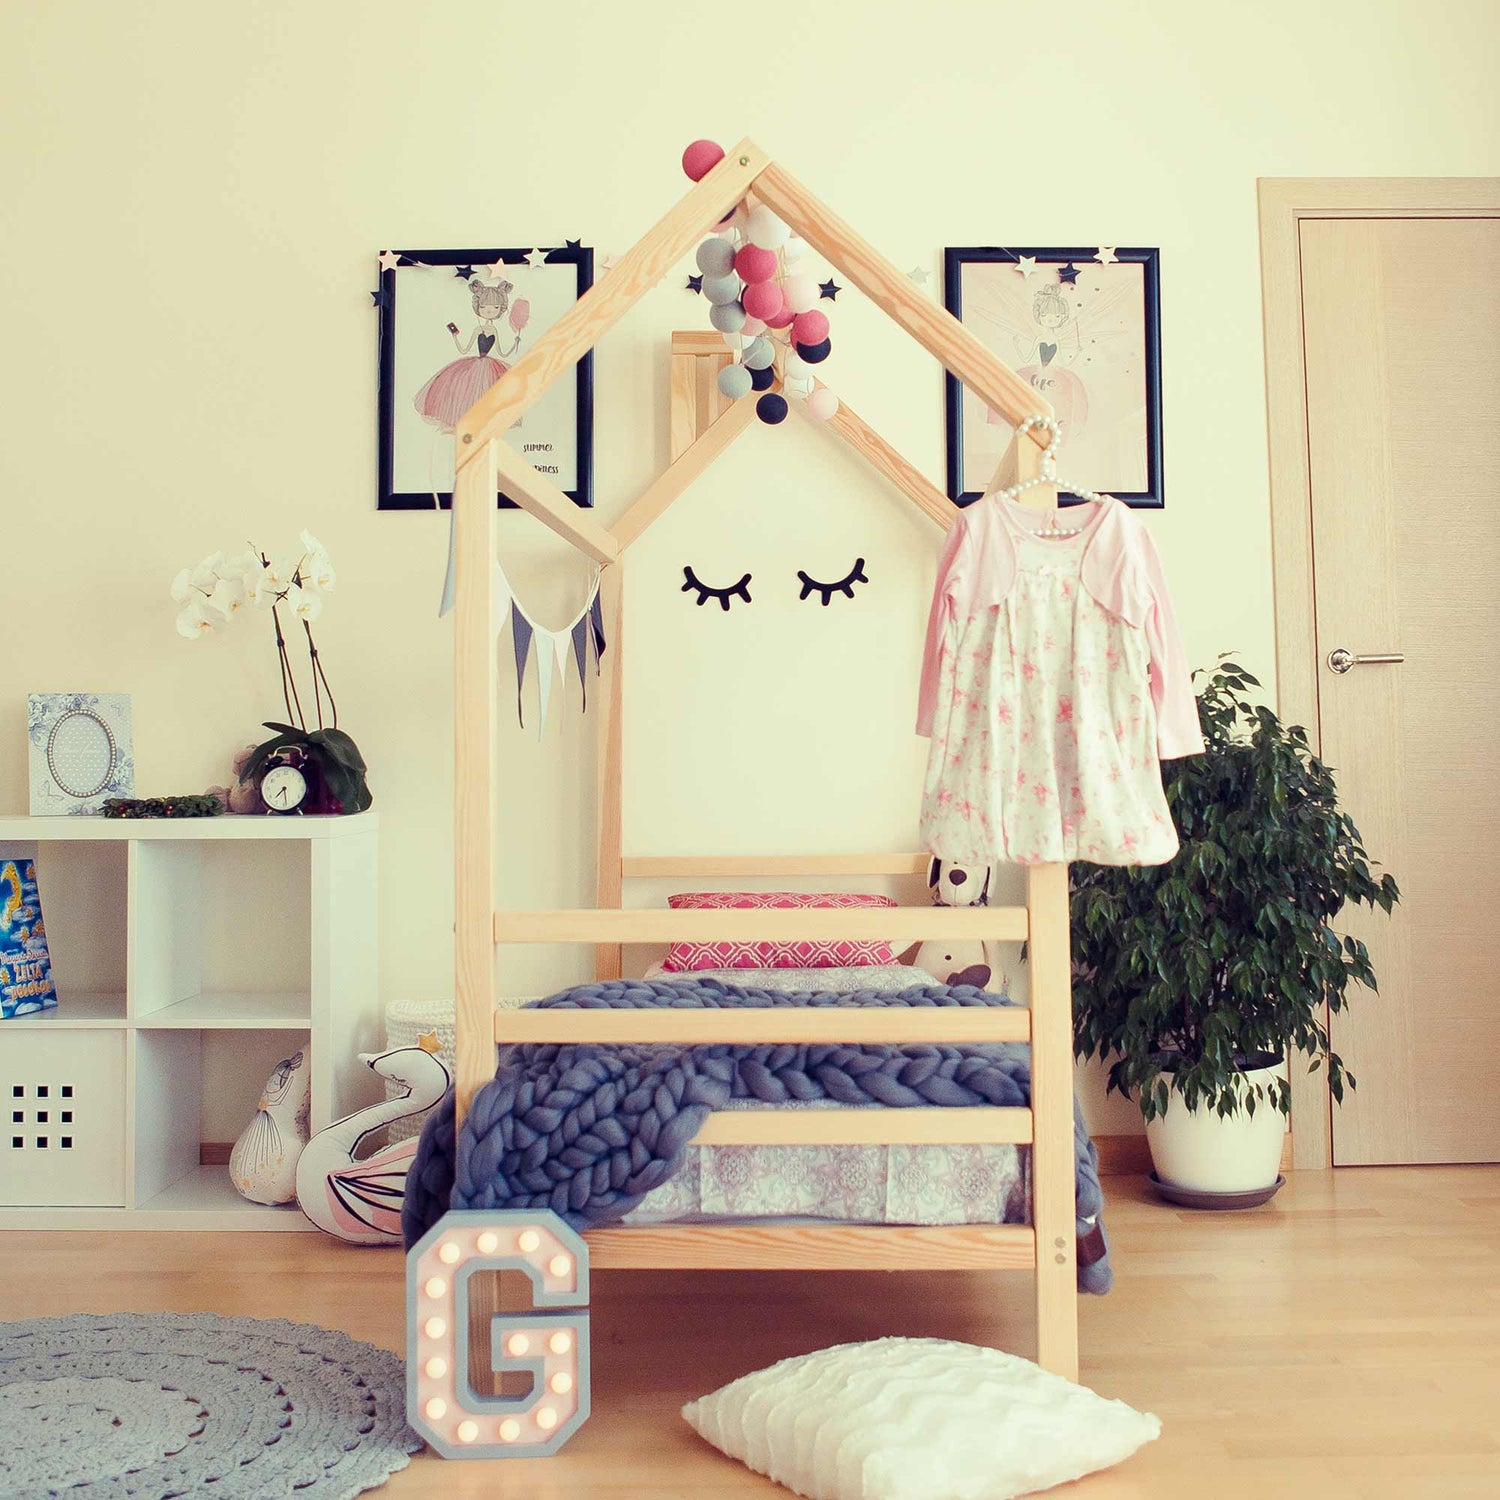 A child's bedroom with a wooden bed frame.